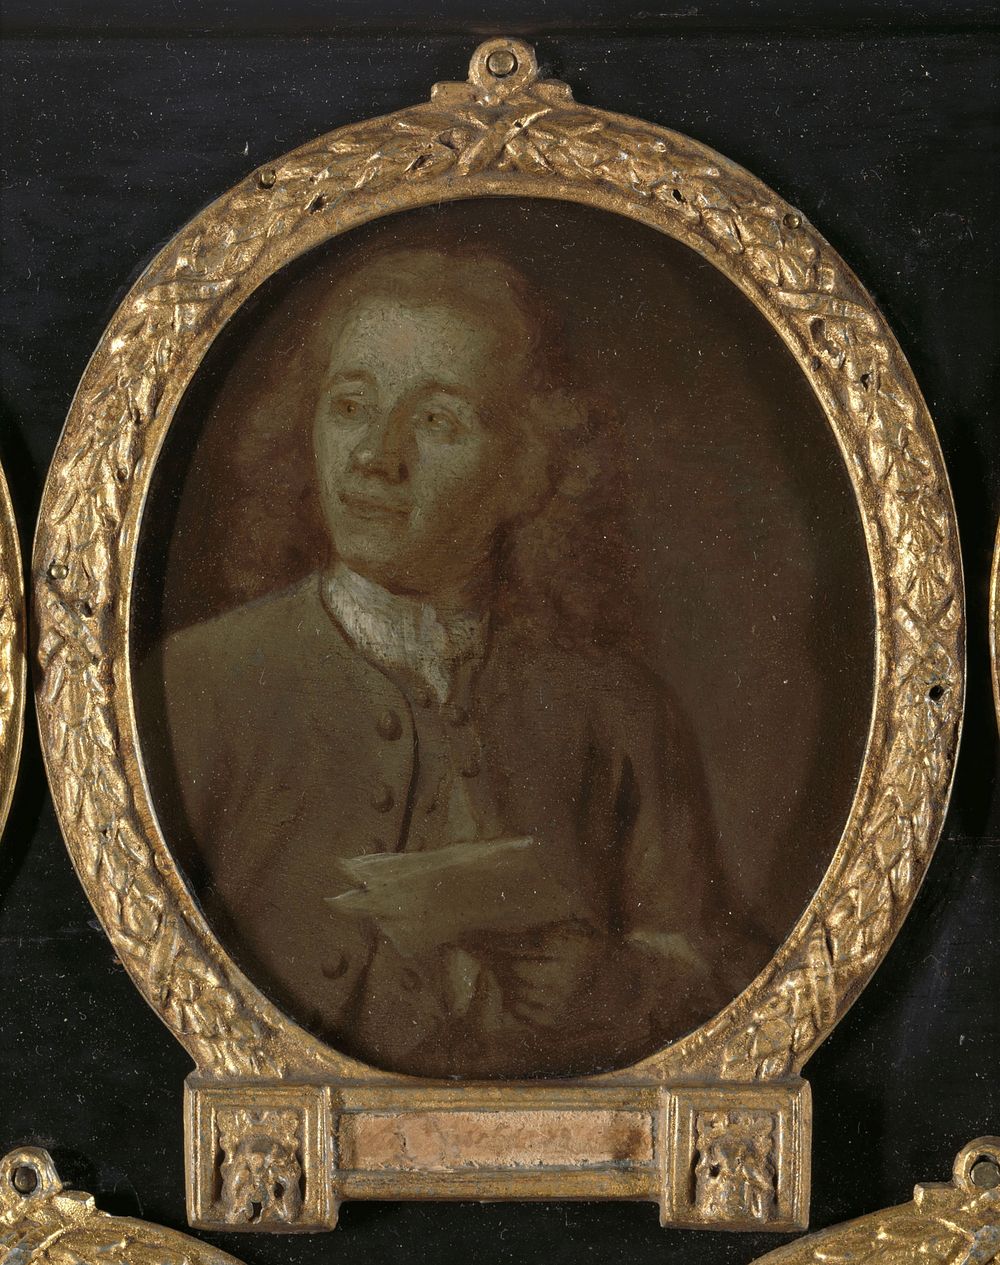 Portrait of Abraham Haen the Younger, Draftsman, Etcher and Poet in Amsterdam (1732 - 1771) by Jan Maurits Quinkhard and…